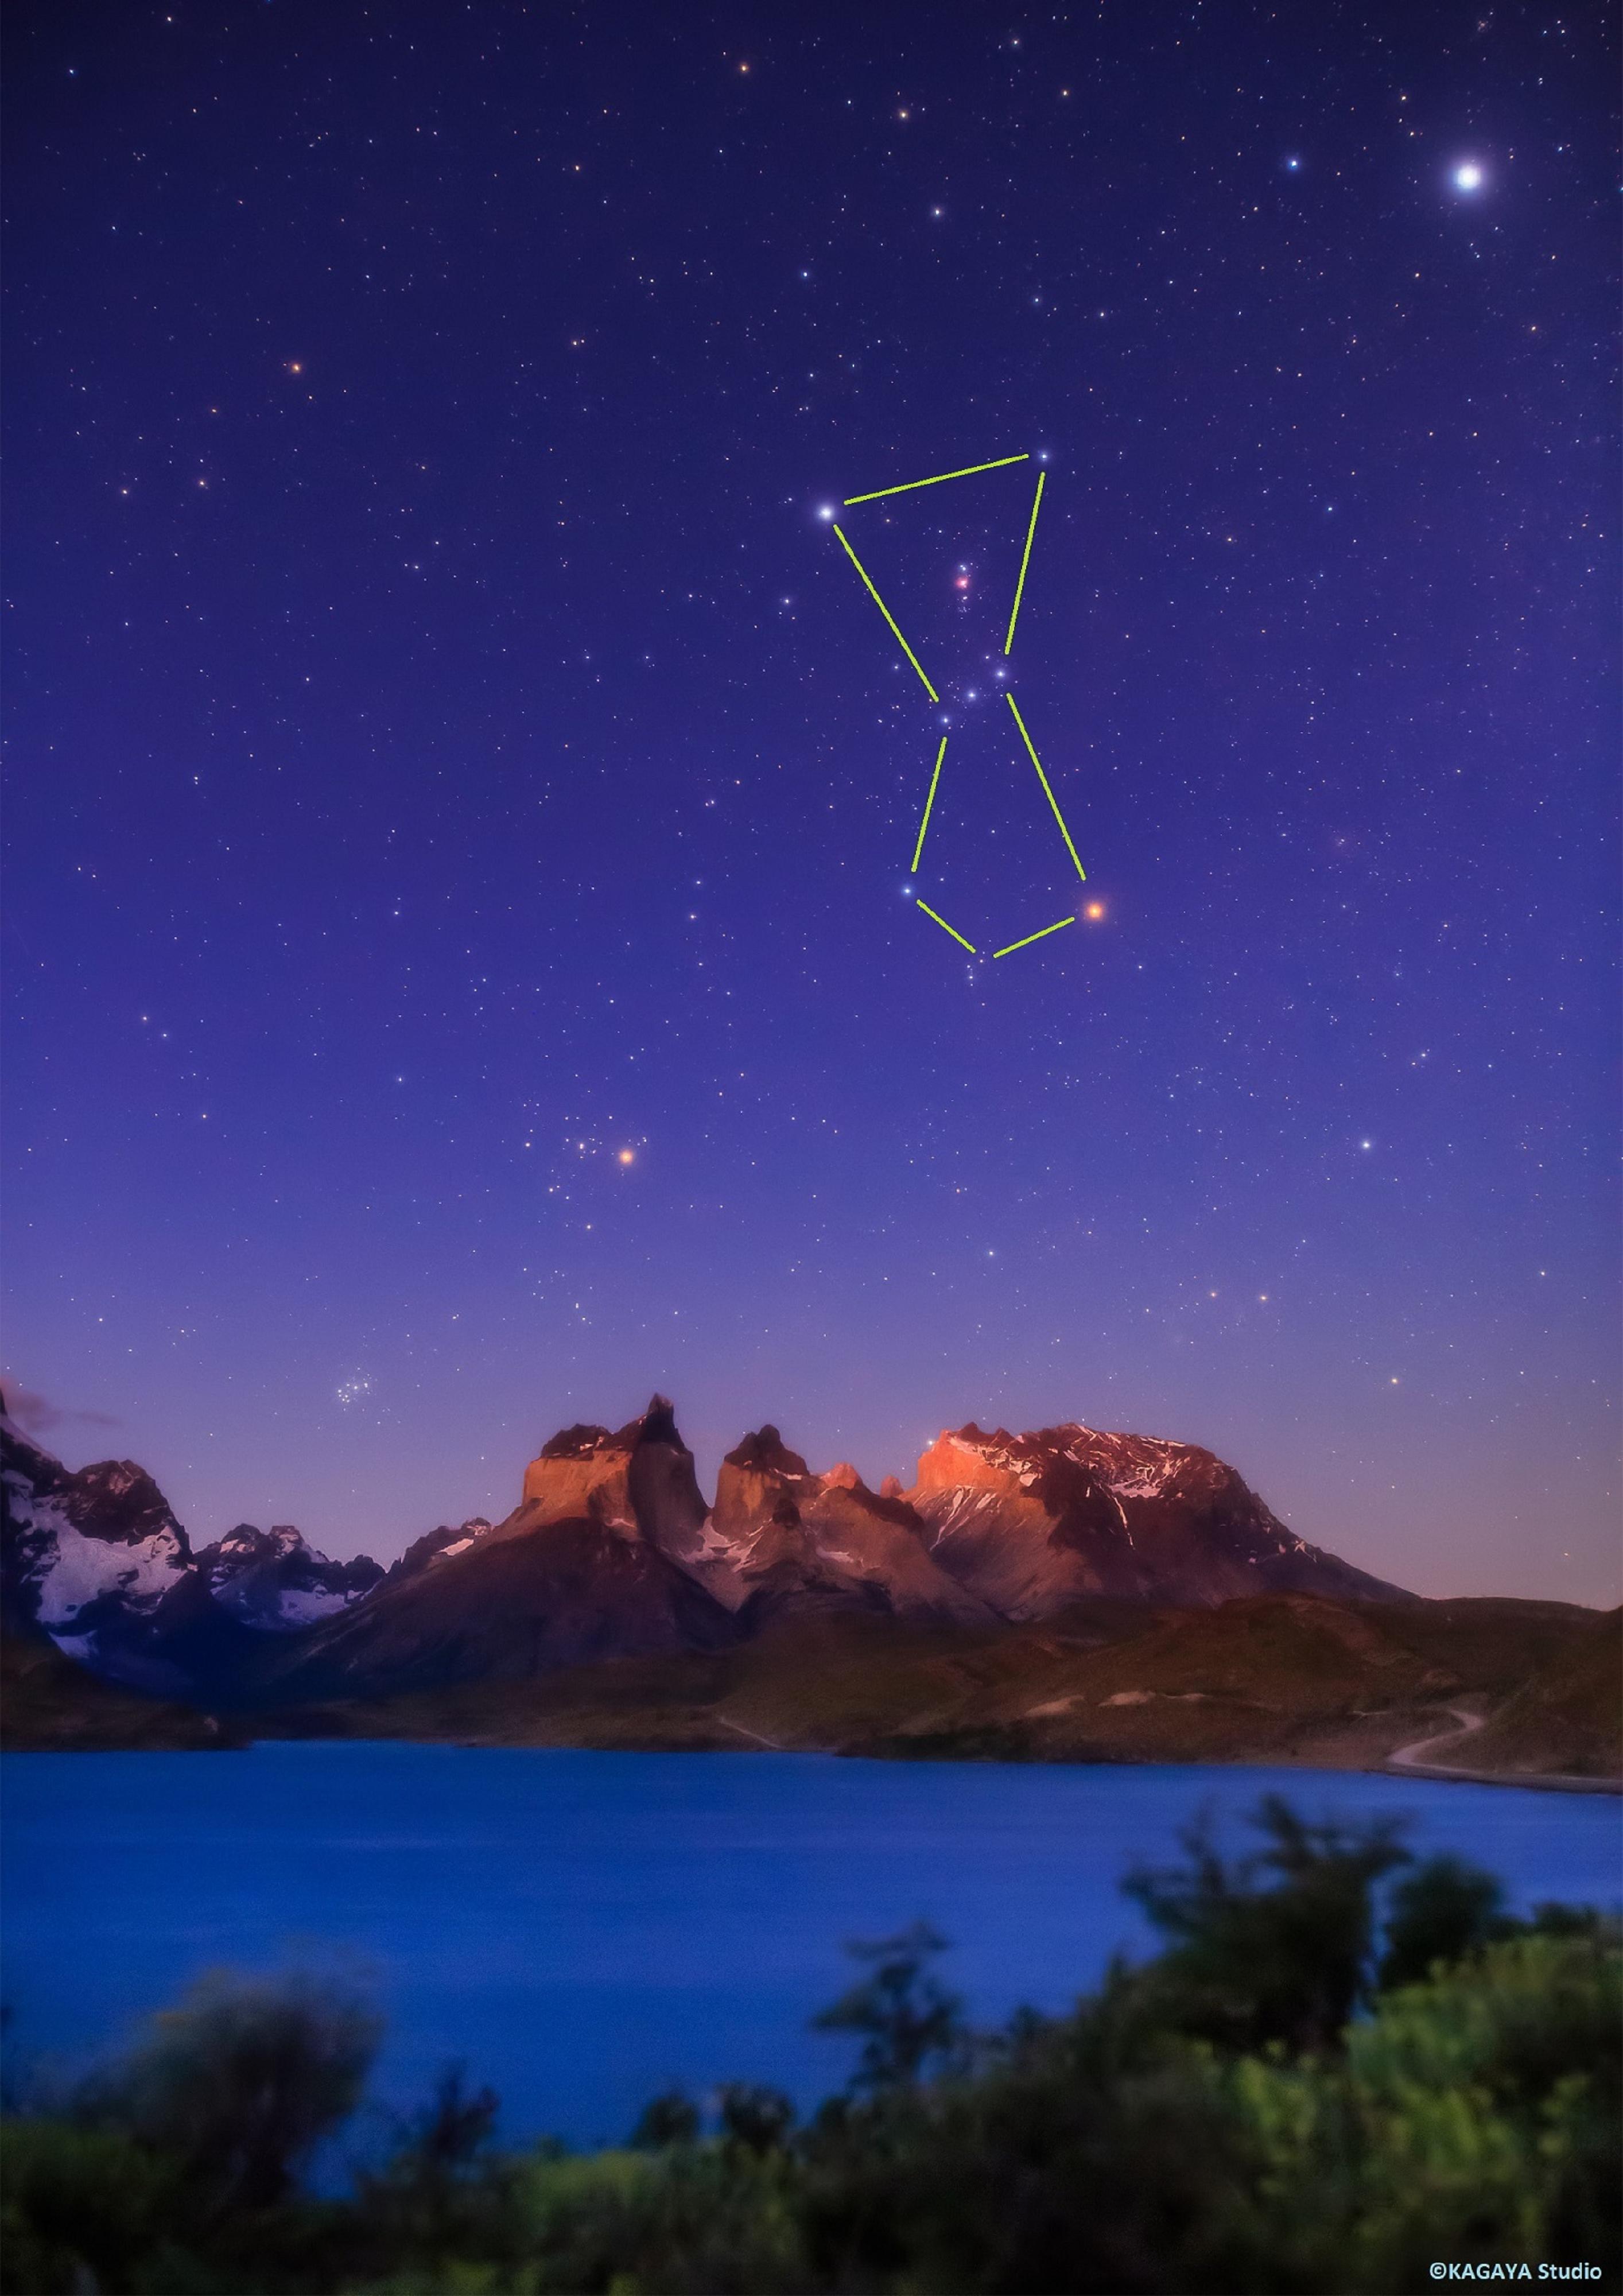 The Hong Kong Space Museum will launch a new sky show, "Sky Tour: Window on the Universe", at its Space Theatre tomorrow (October 21). Picture shows one of the most easily recognisable constellations, Orion, which can be seen in both the northern and southern hemispheres. The pattern of Orion looks like a hunter with his bow and an arrow, and the belt around his waist is formed by three evenly spaced stars. Orion stands upright in the northern hemisphere and appears upside down in the southern hemisphere.